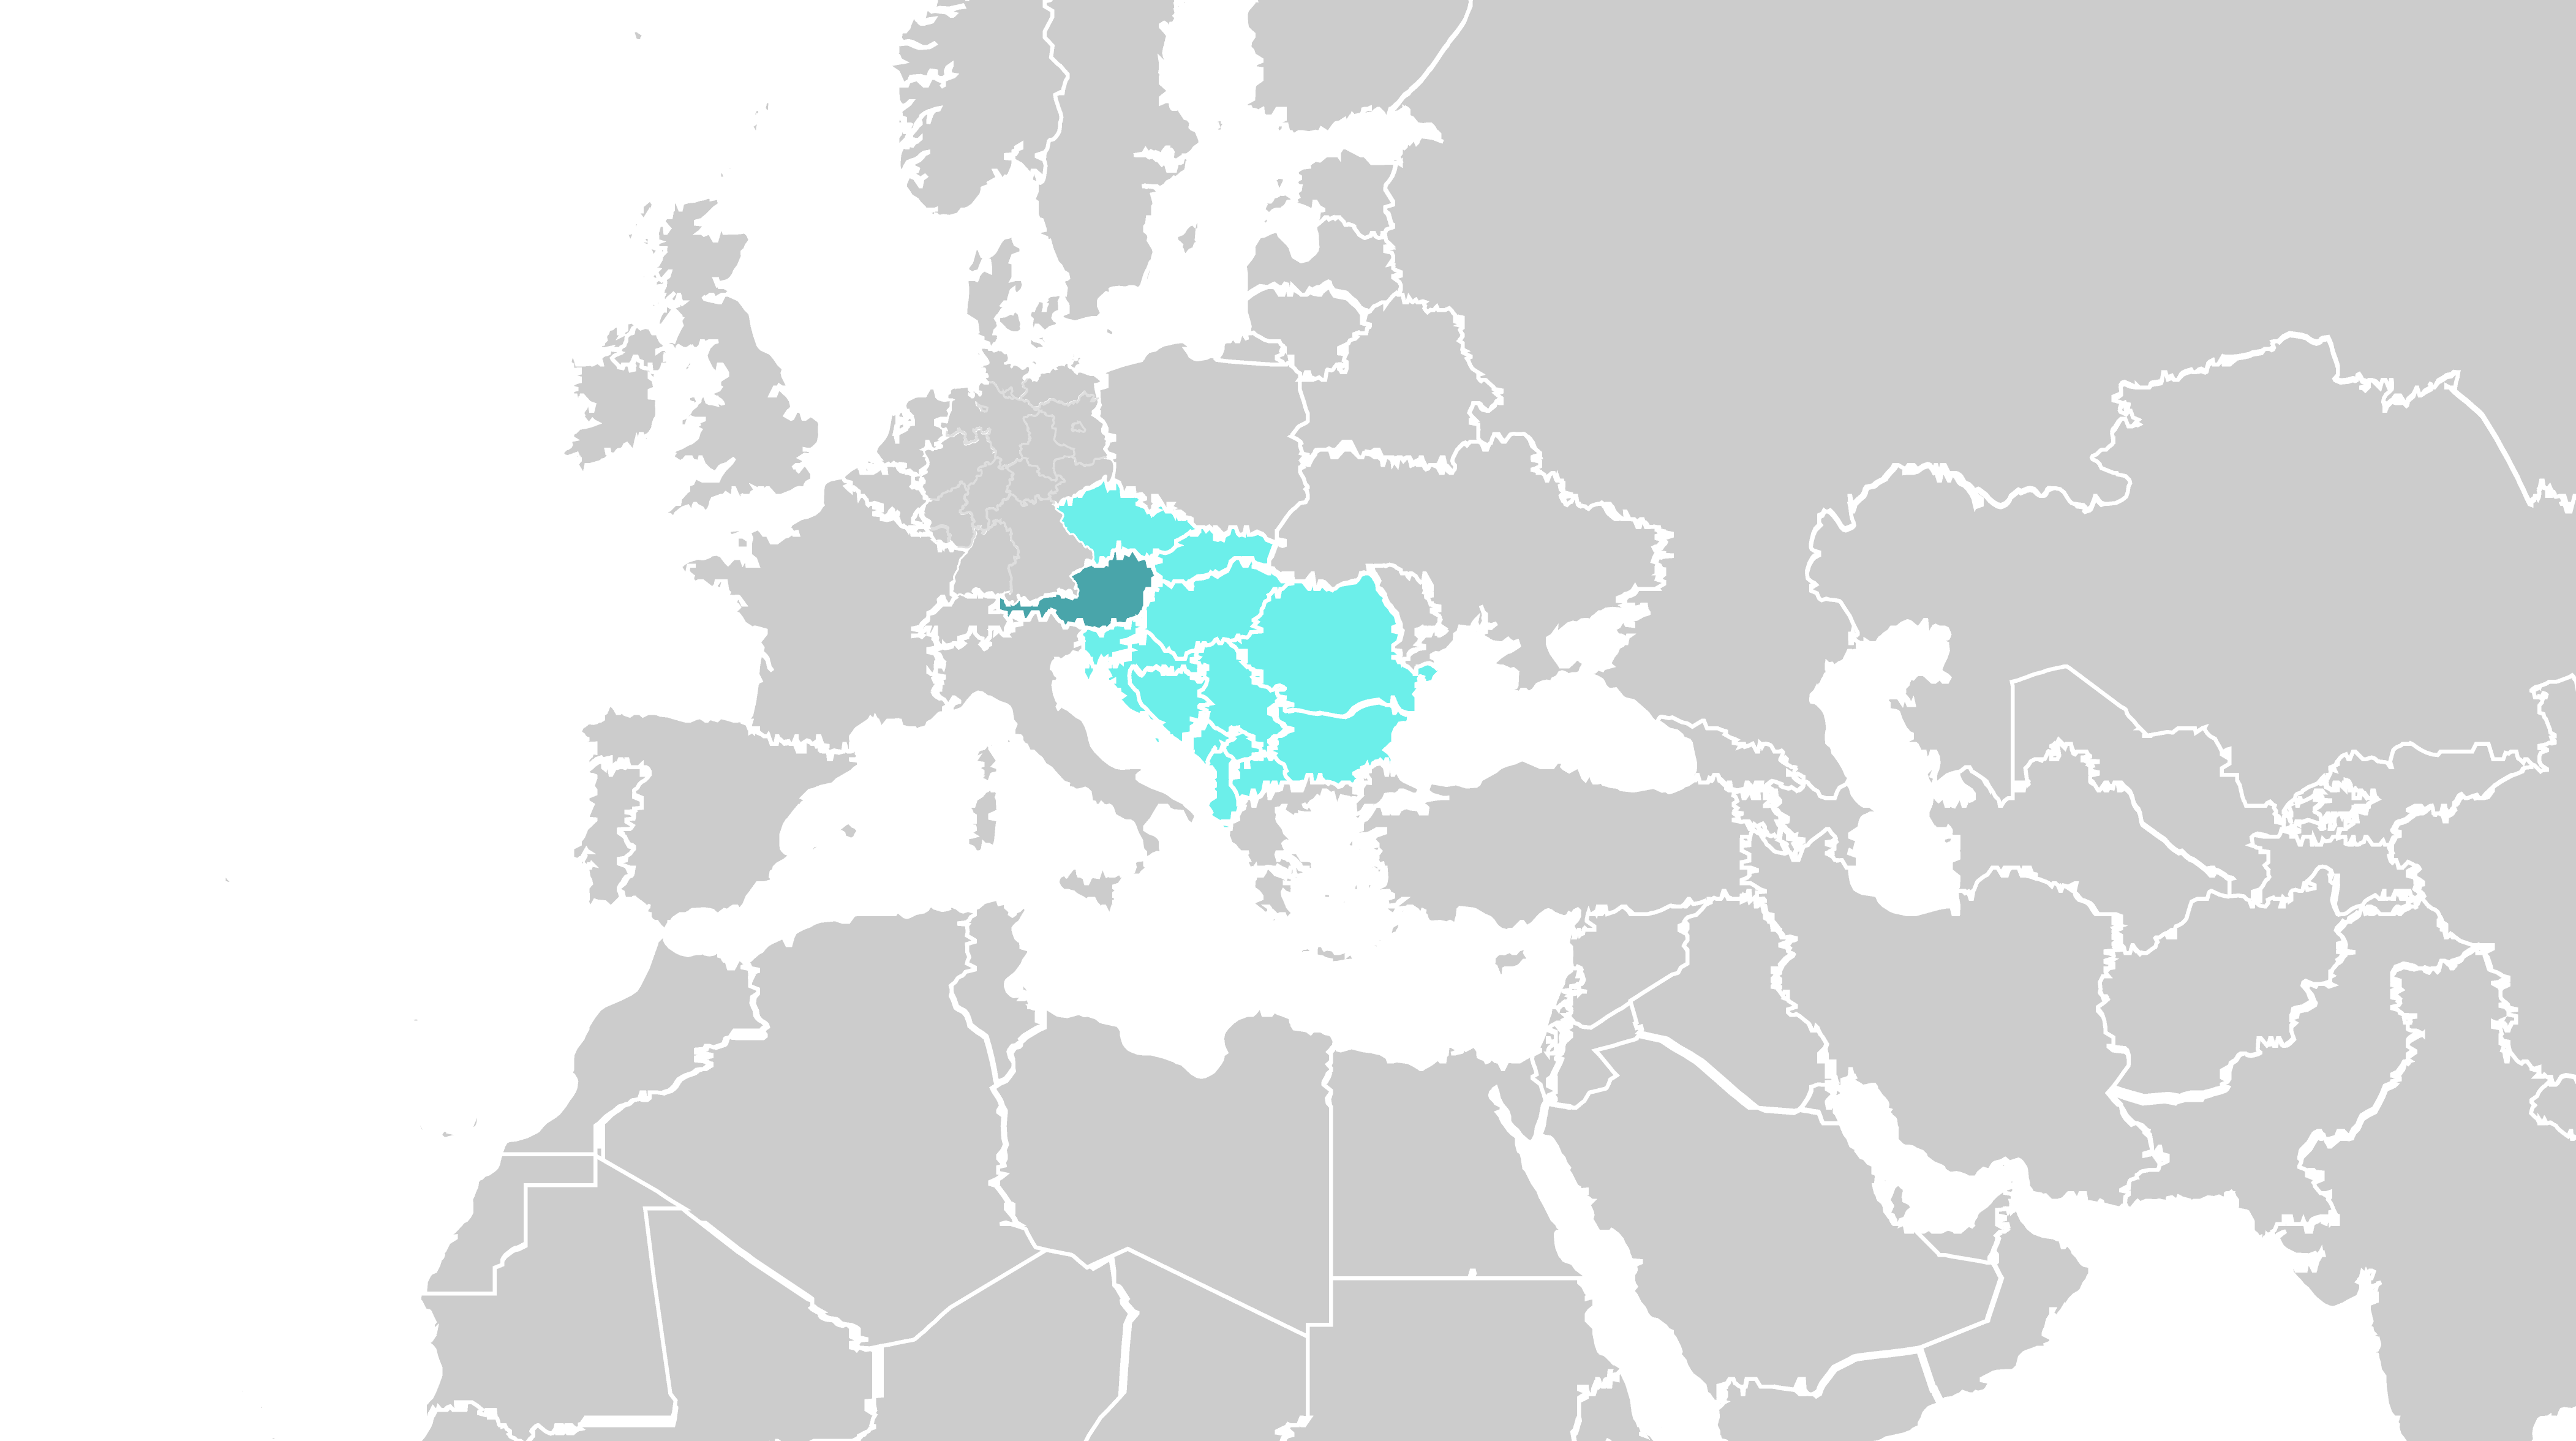 A map of Europe with the majority of countries colored in grey. Austria as well as the central and eastern European markets are colored in turquoise. 